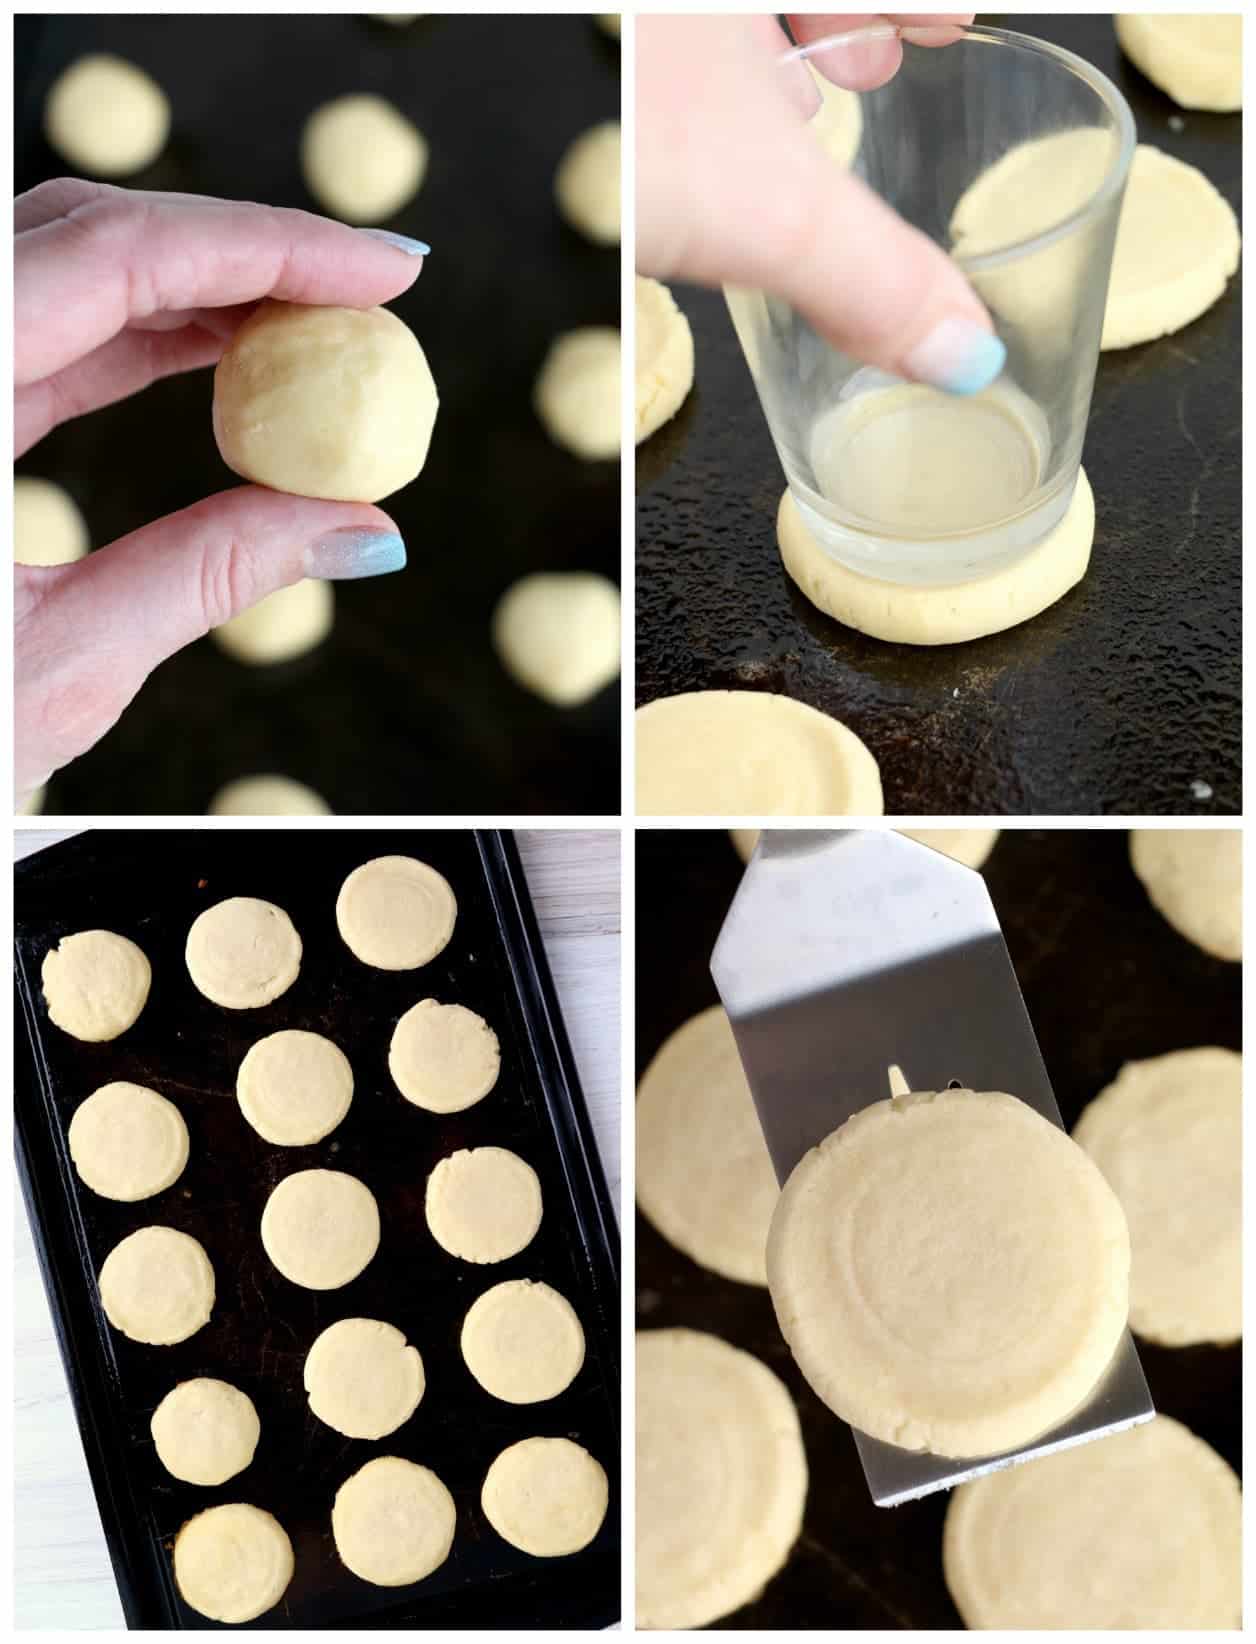 Four process photos. First one, cookir dough rolled into a ball and held between fingers. Second one, cookie dough placed onto a cookie sheet and a glass cup pressing them down. Third one, 15 pressed cookies on a baking sheet. Fourth one, a small spatula picking a cookie up.